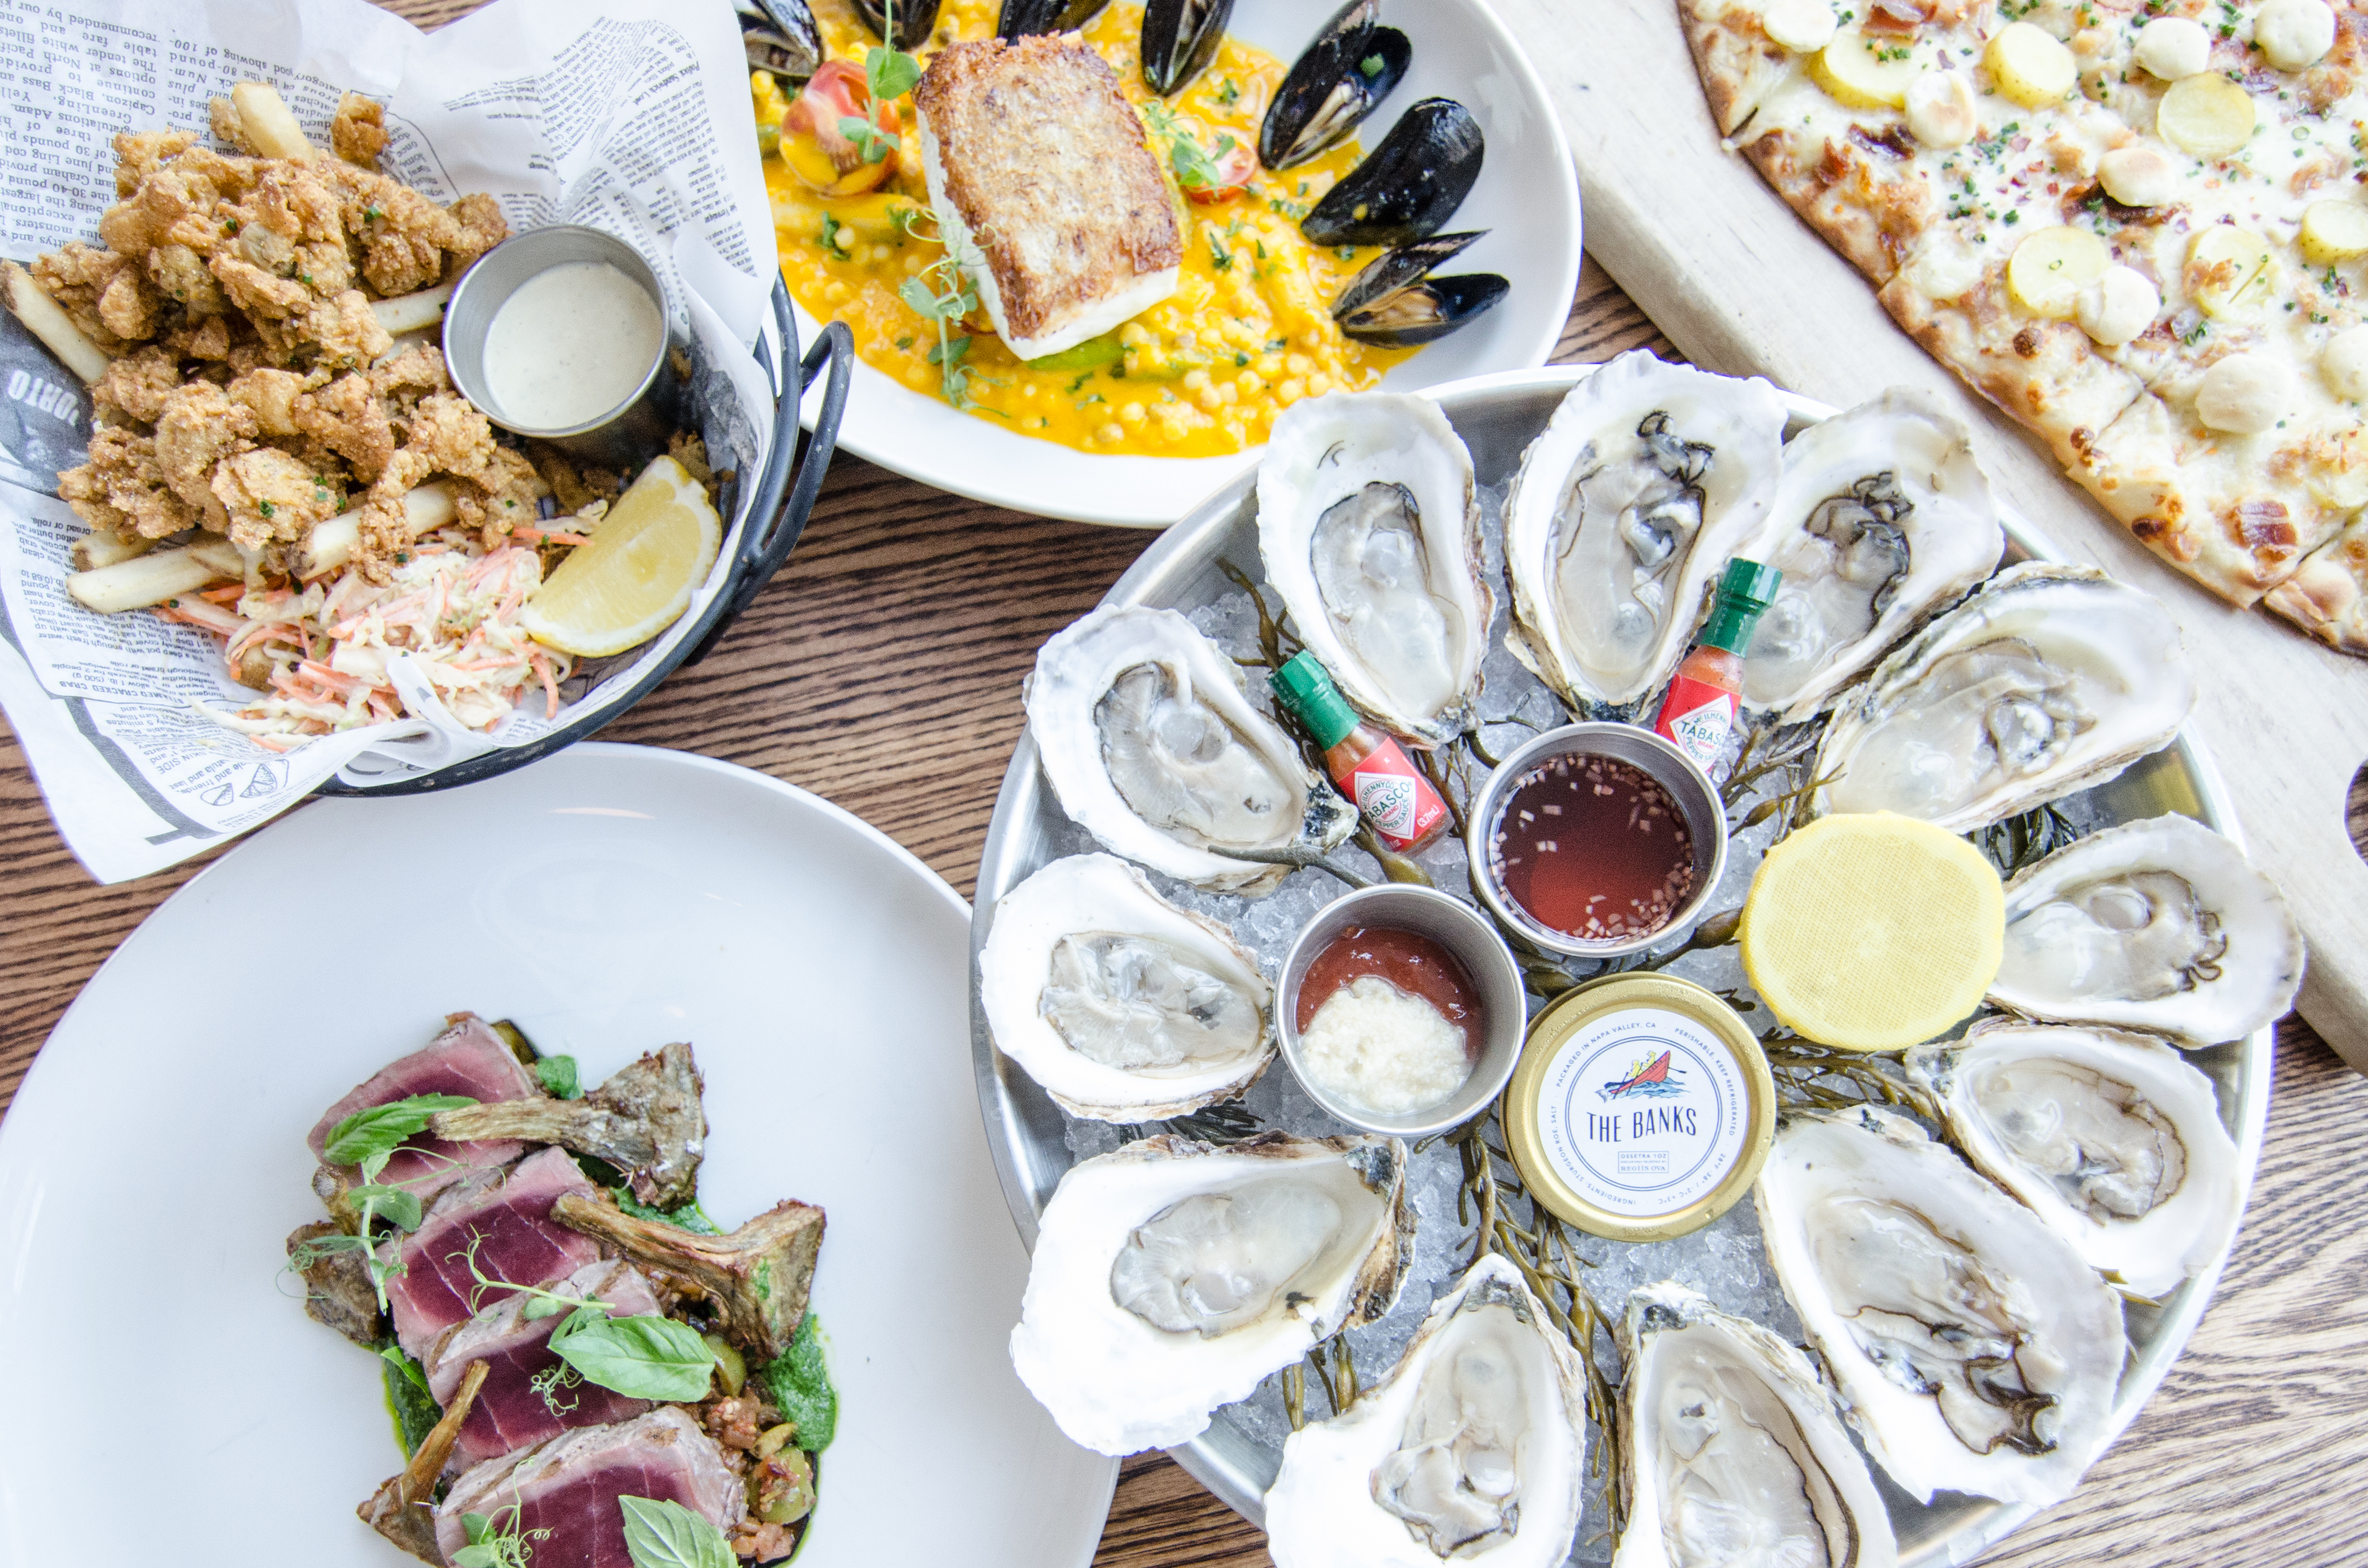 Overhead view of a table full of seafood dishes, including a platter of oysters, a basket of fried clams and fries, rare bluefin tuna, and more